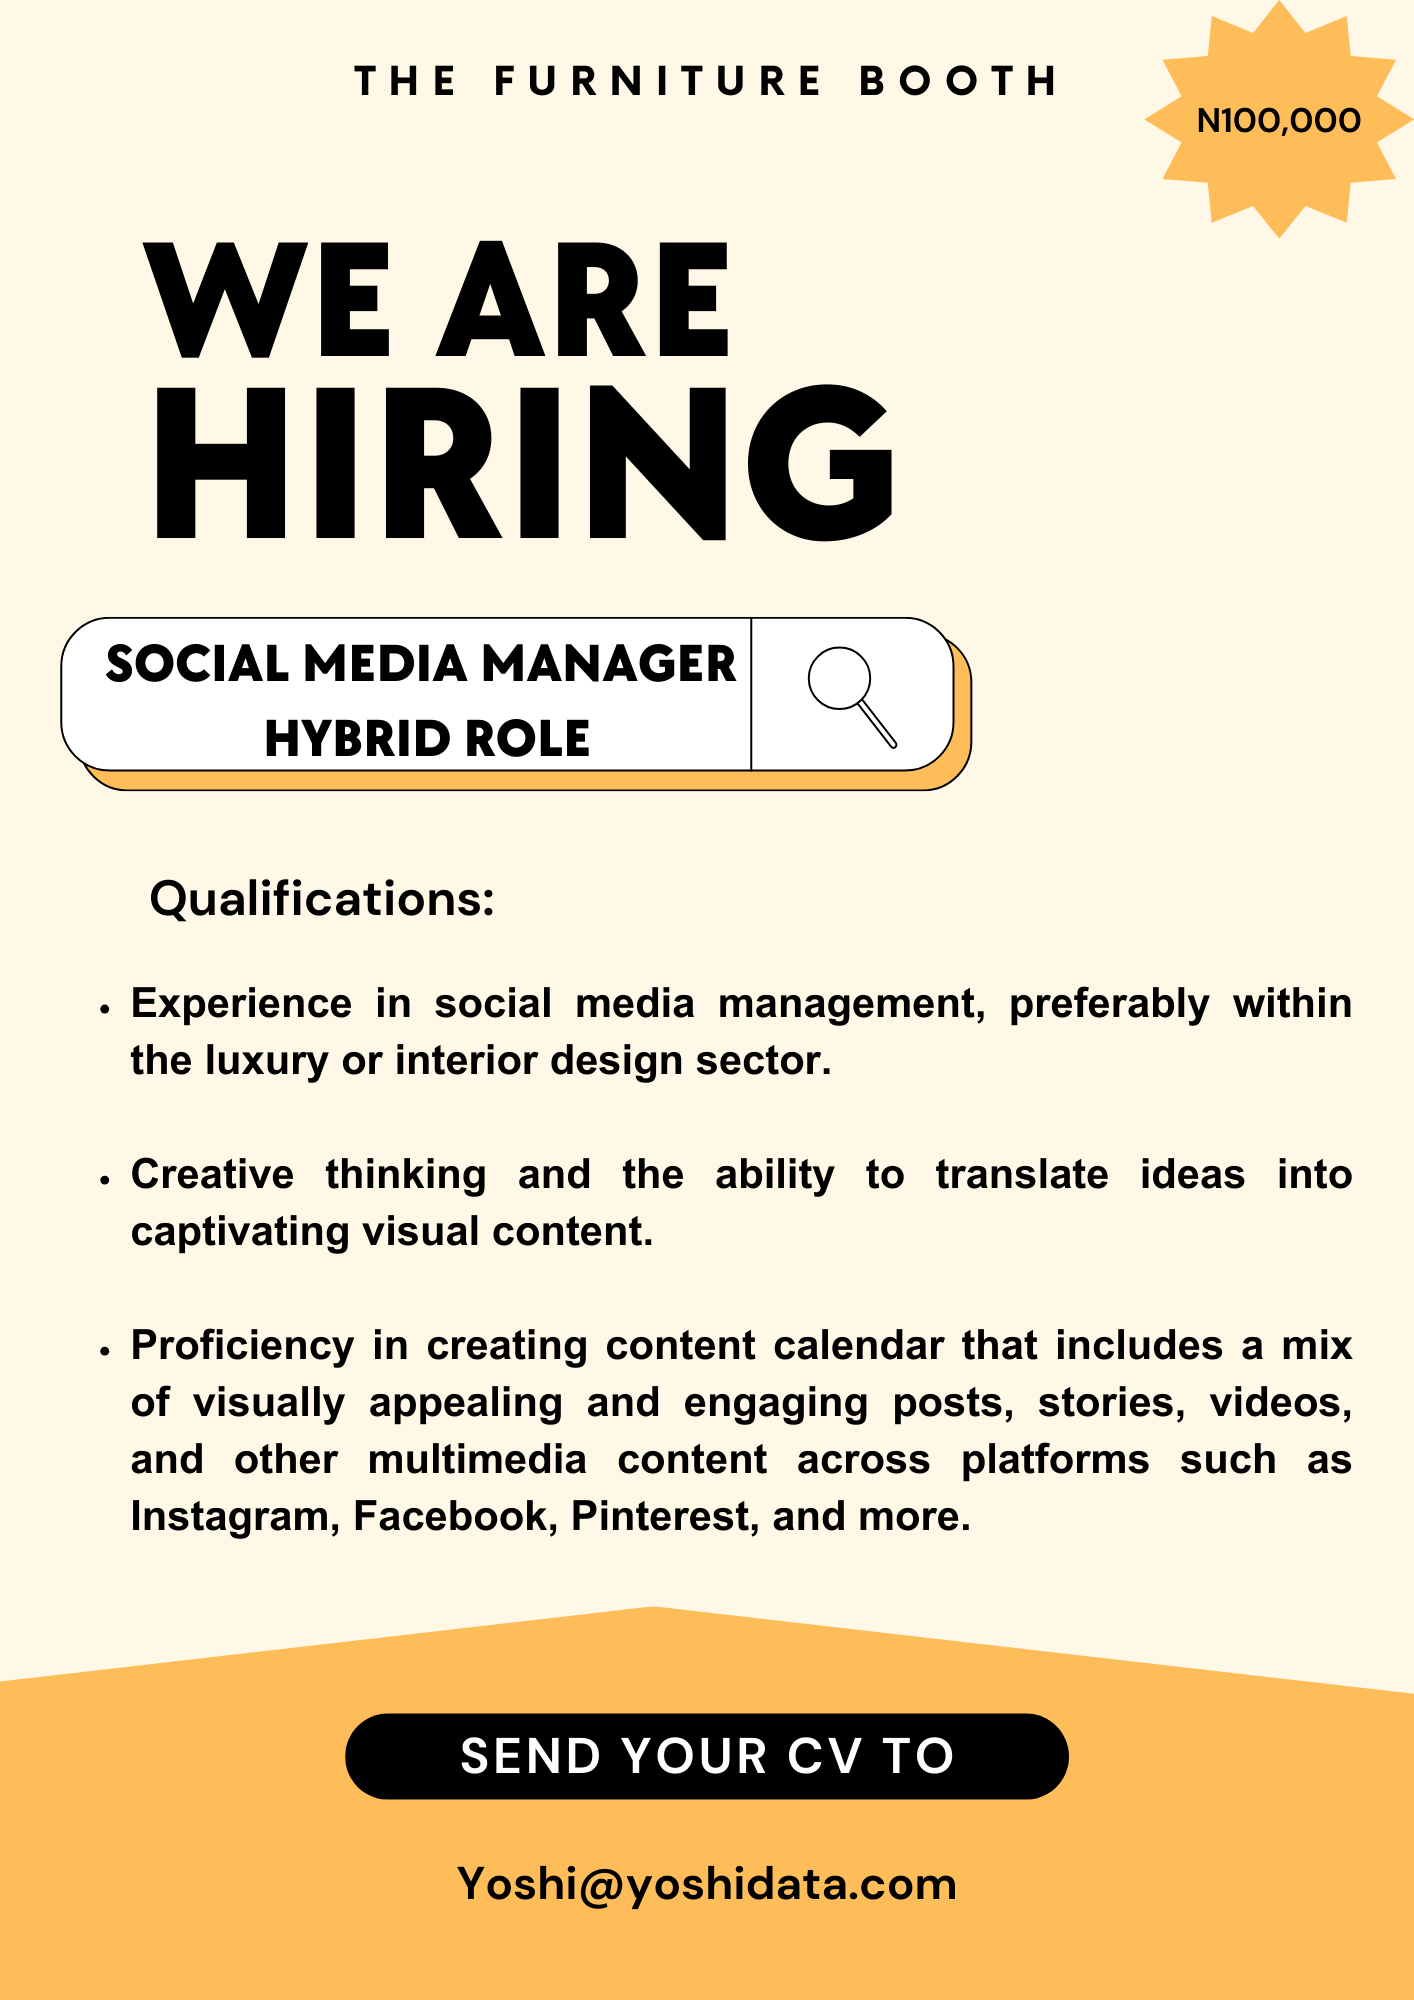 Social Media Manager Needed at Furniture Booth (100K/month)